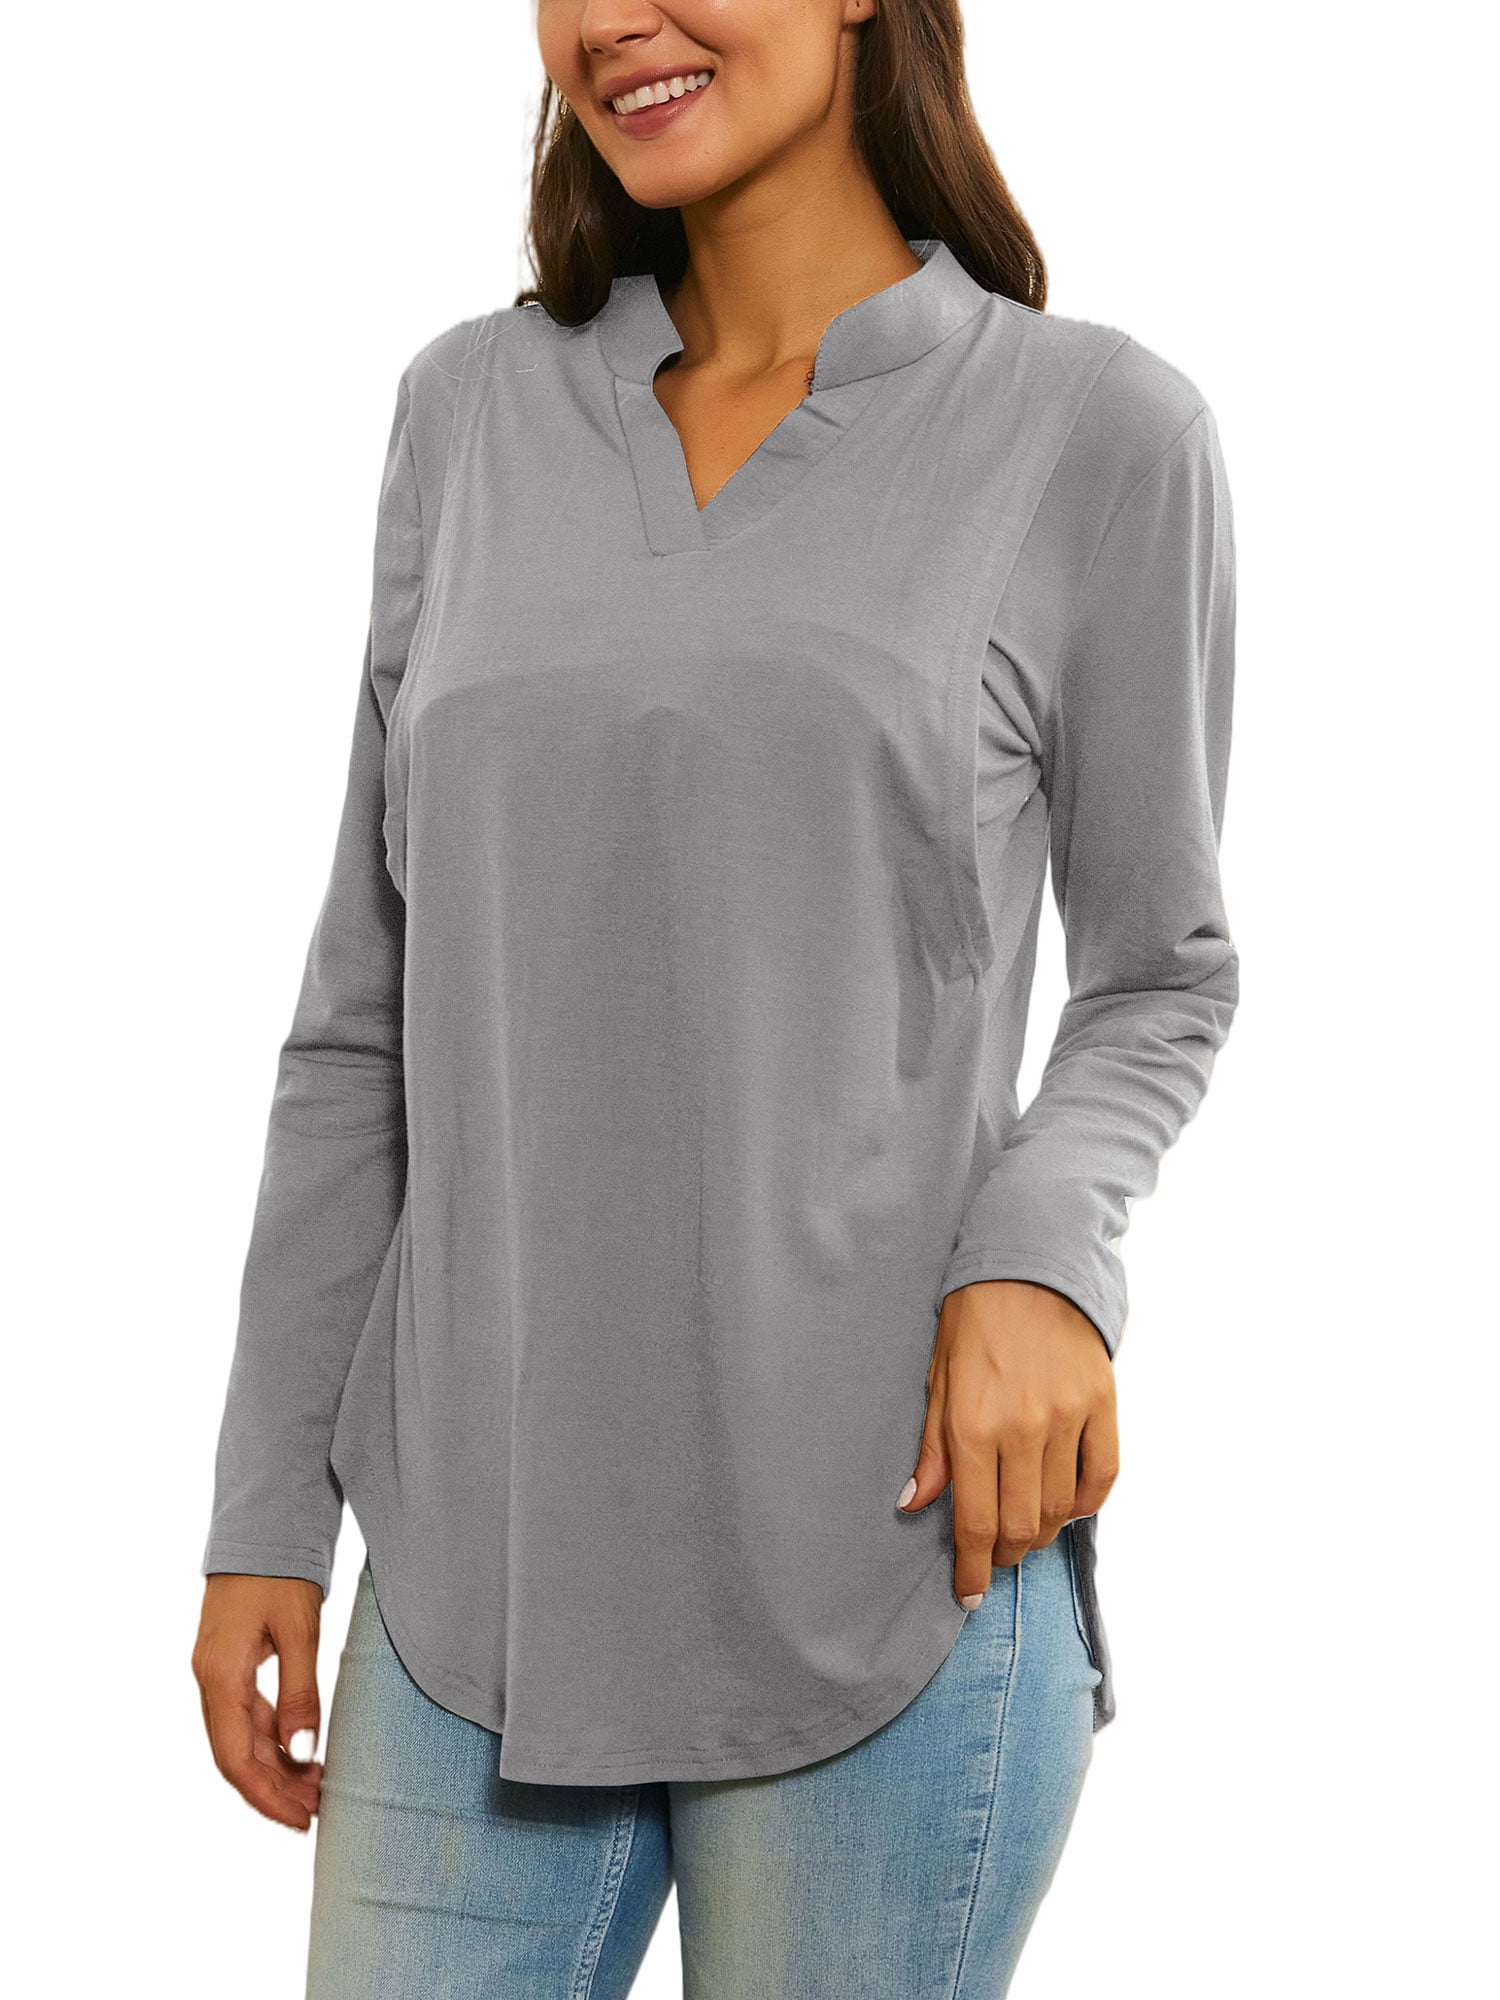 Womens Maternity Nursing Tunic Pregant V Neck Rolled Up Sleeve Double Layer Shirts Tops for Breastfeeding